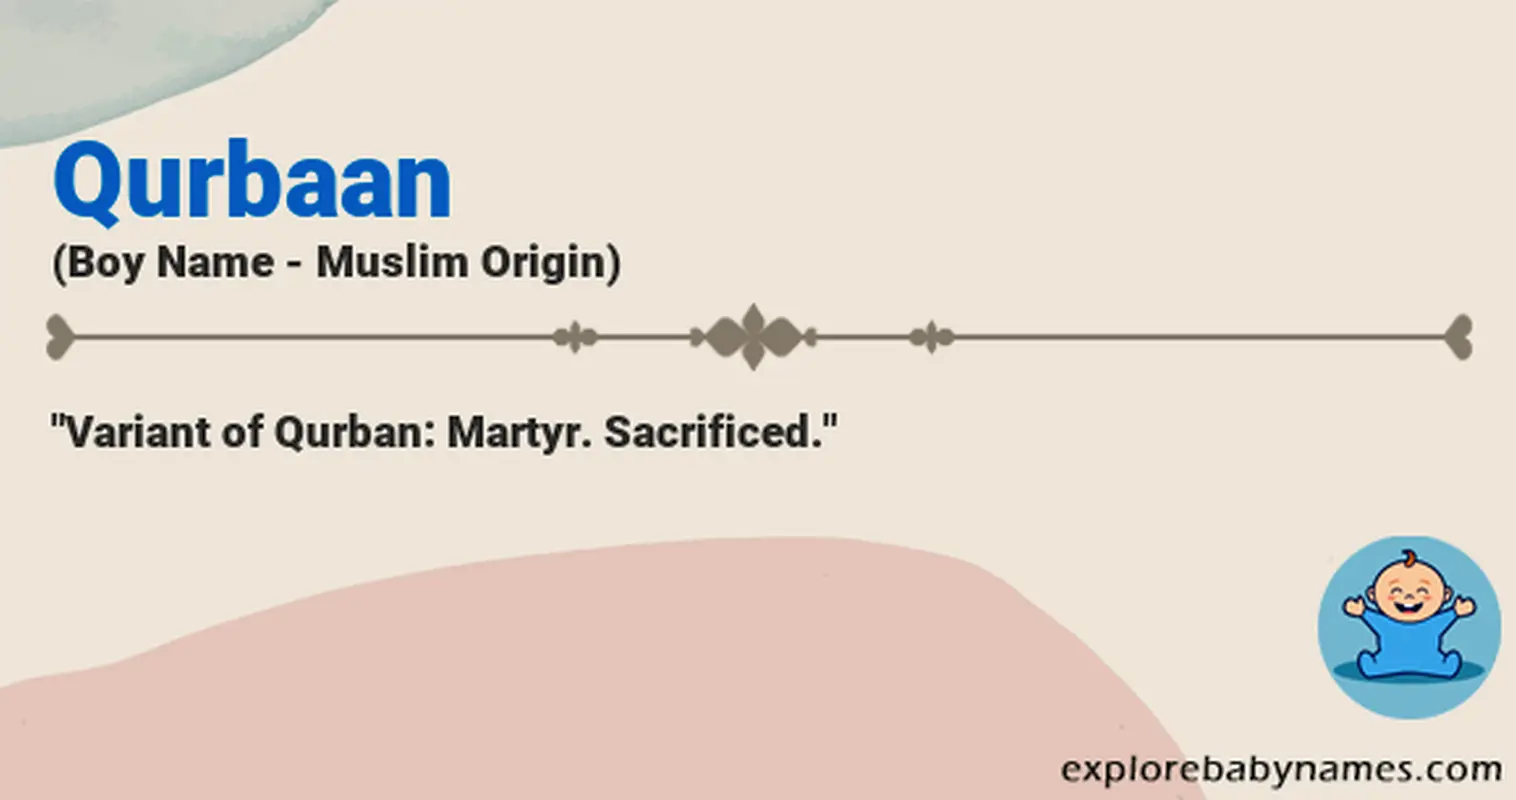 Meaning of Qurbaan